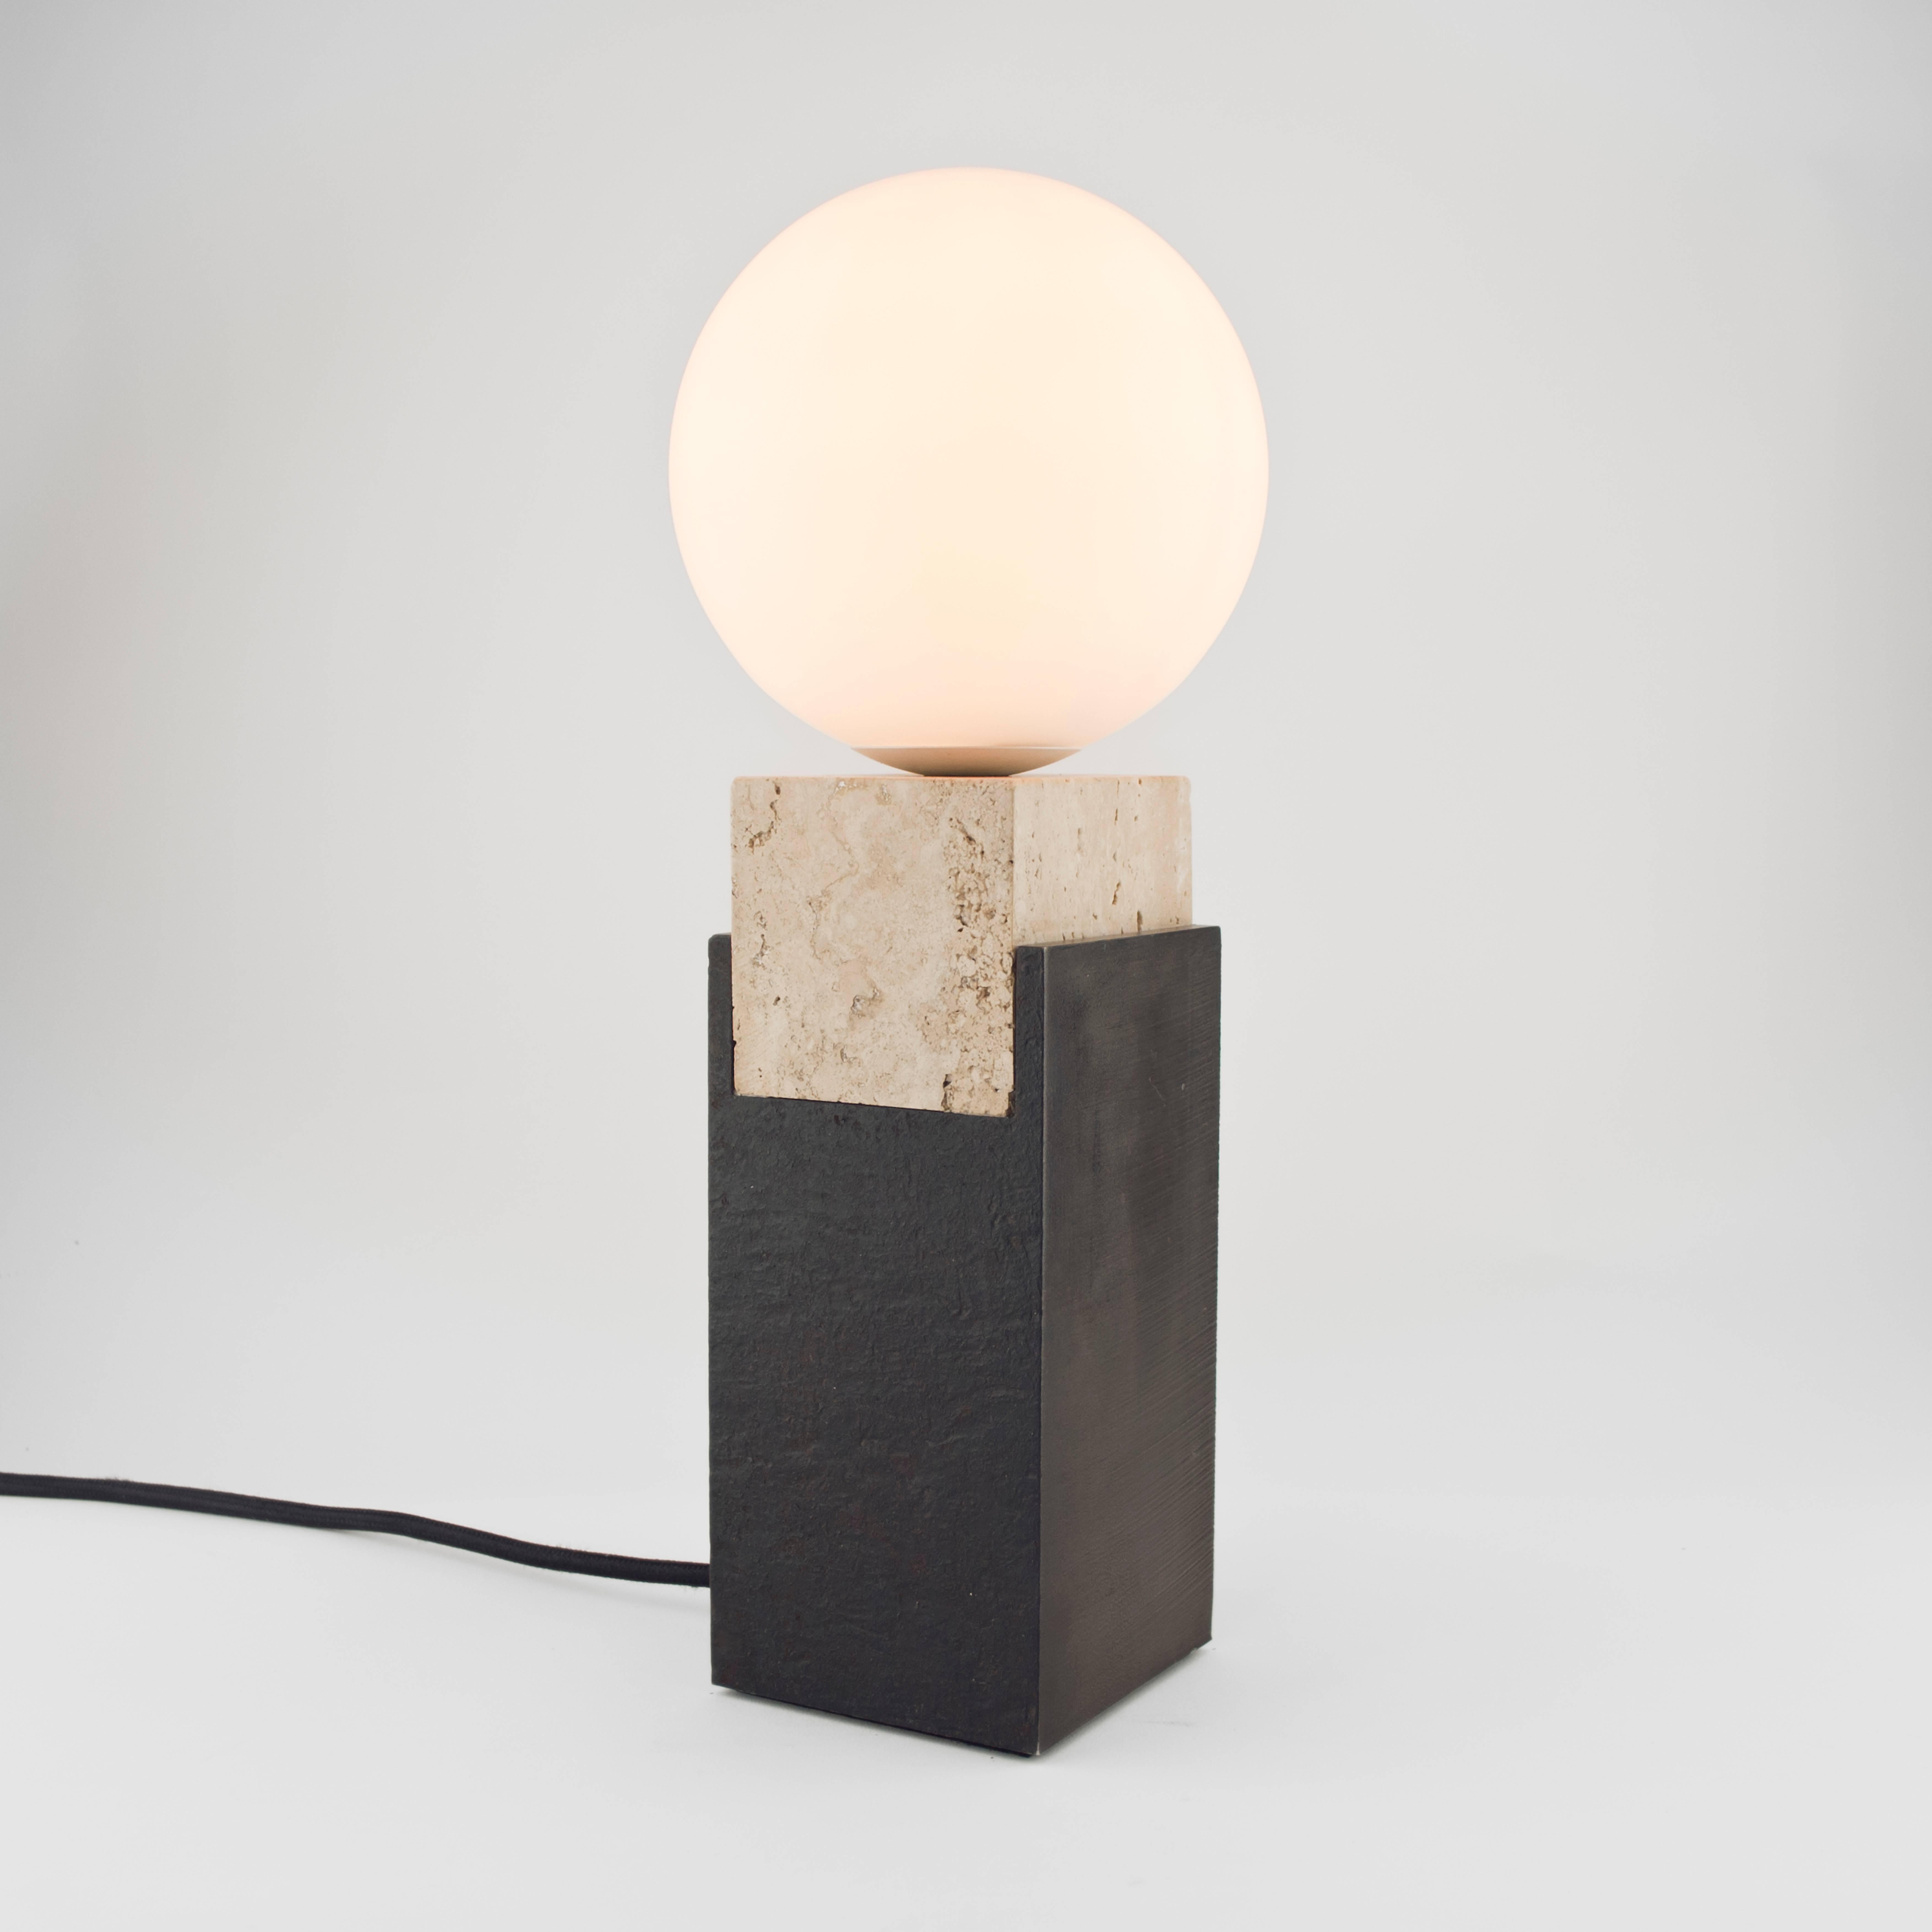 English Contemporary Monument Lamp Square in Travertine, Solid Steel and Glass